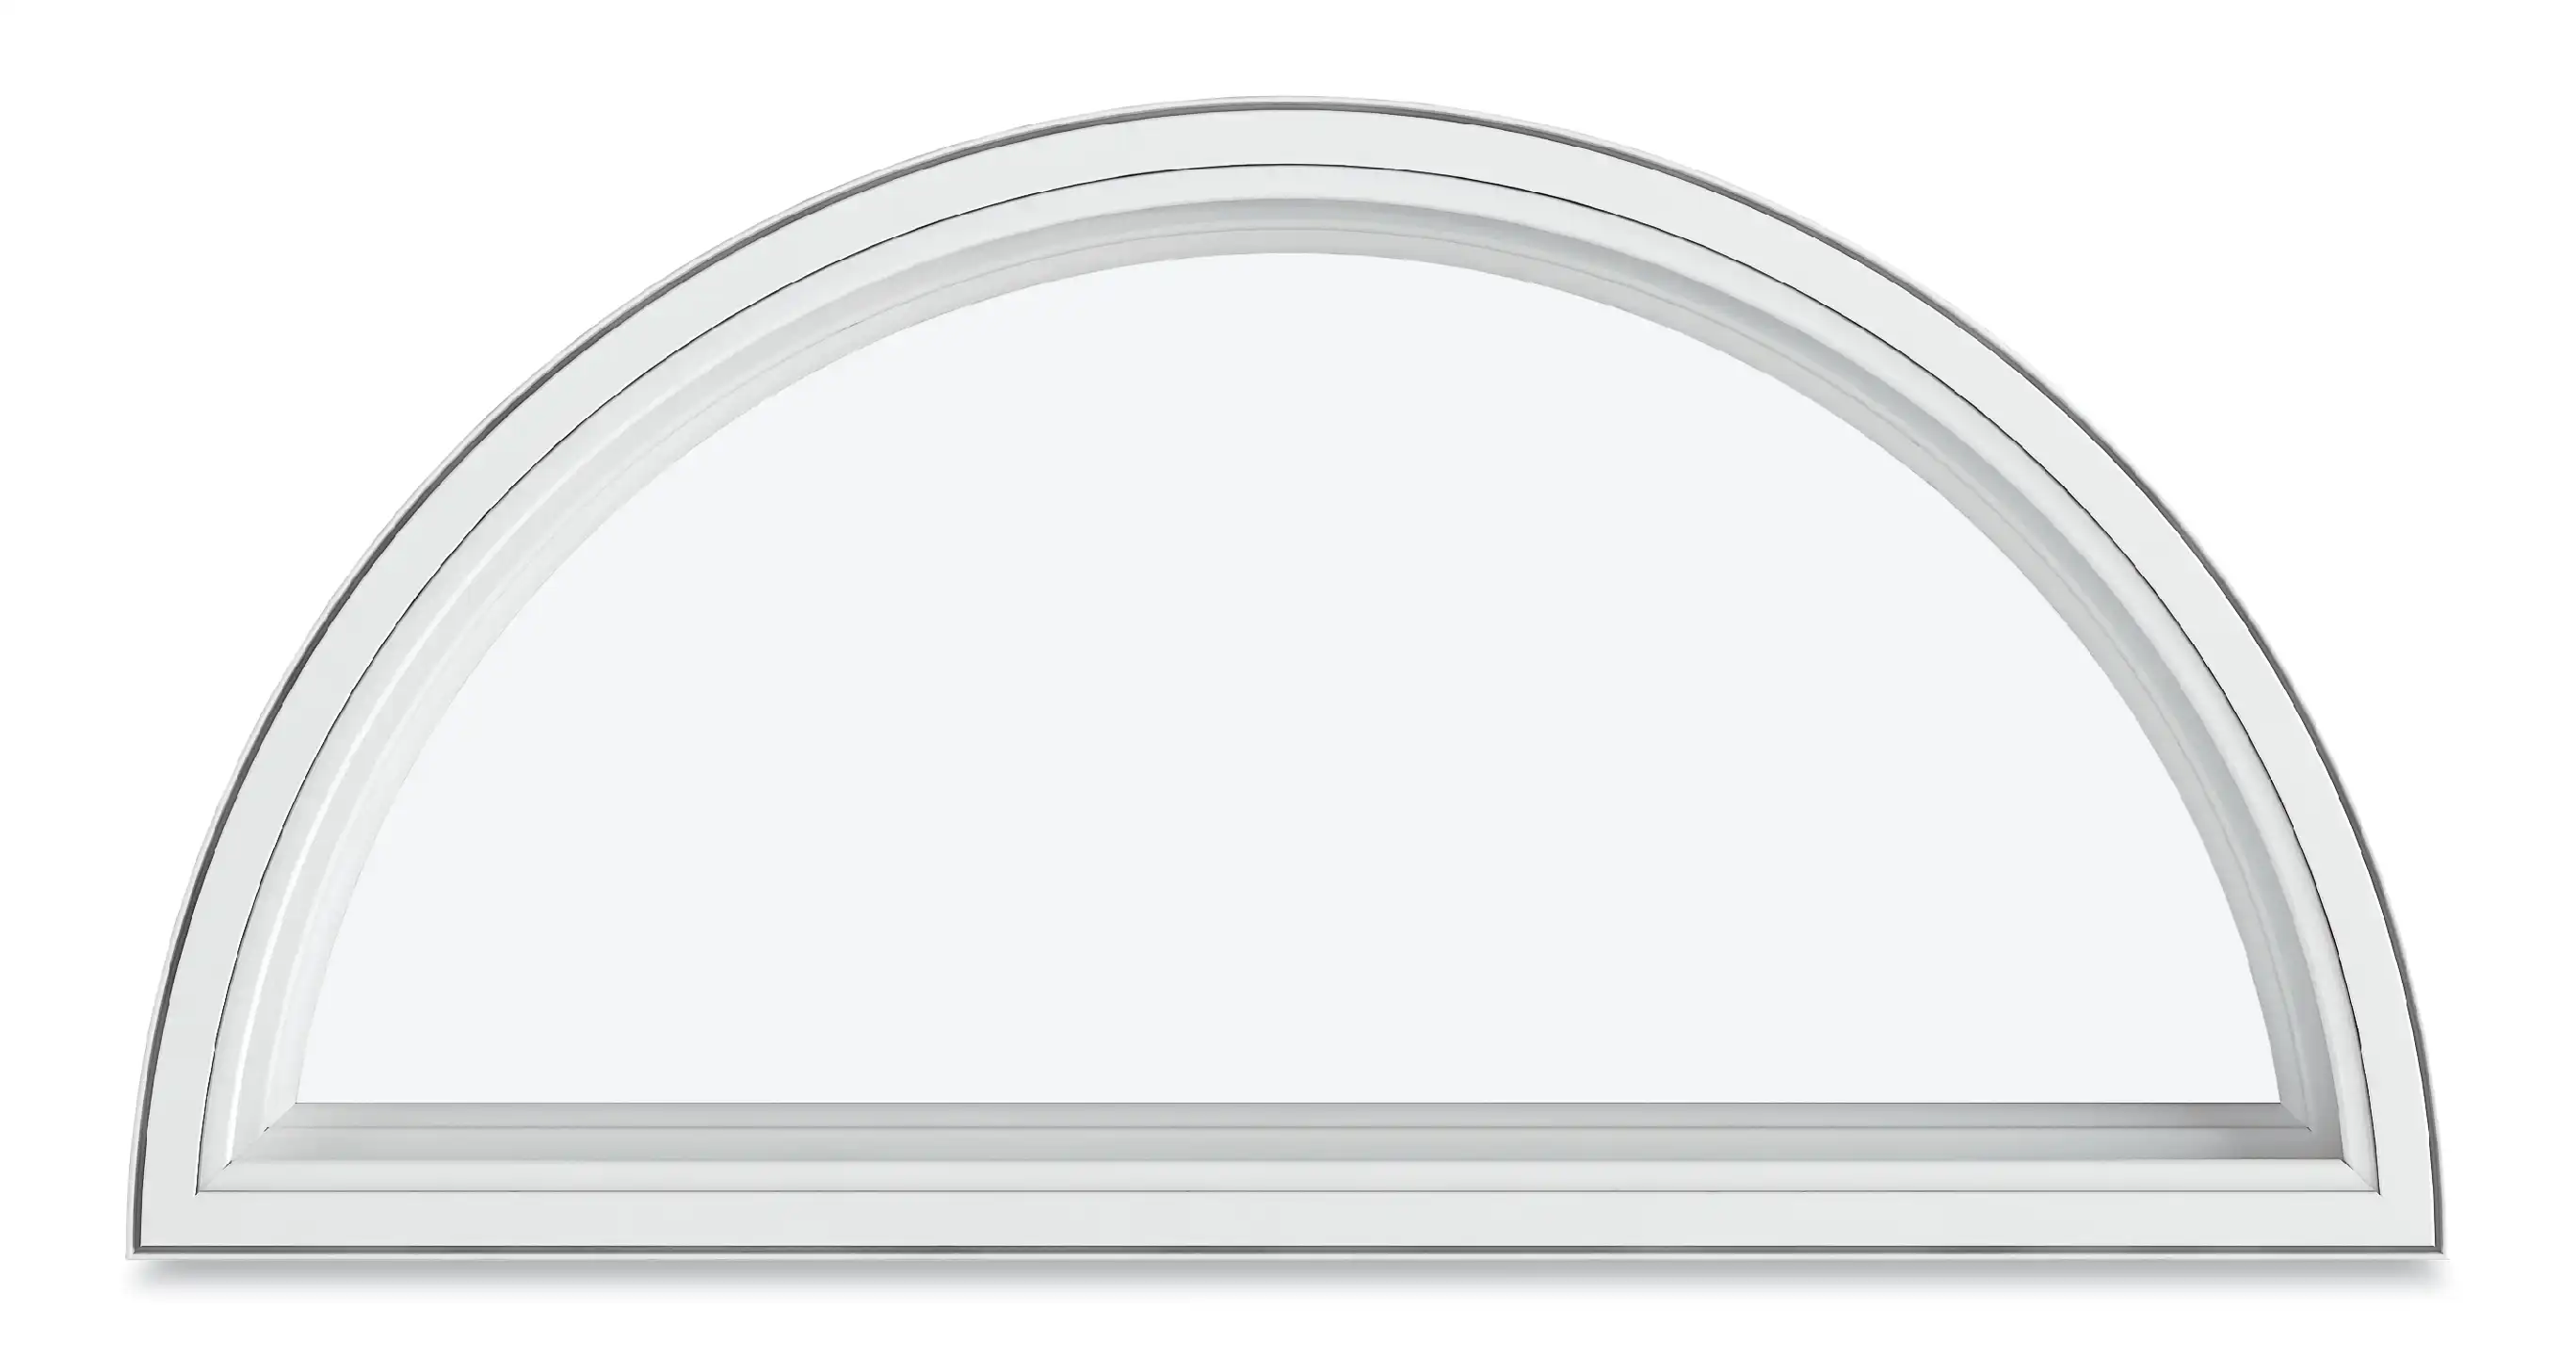 Image of a white Marvin Replacement Half Round Top window.